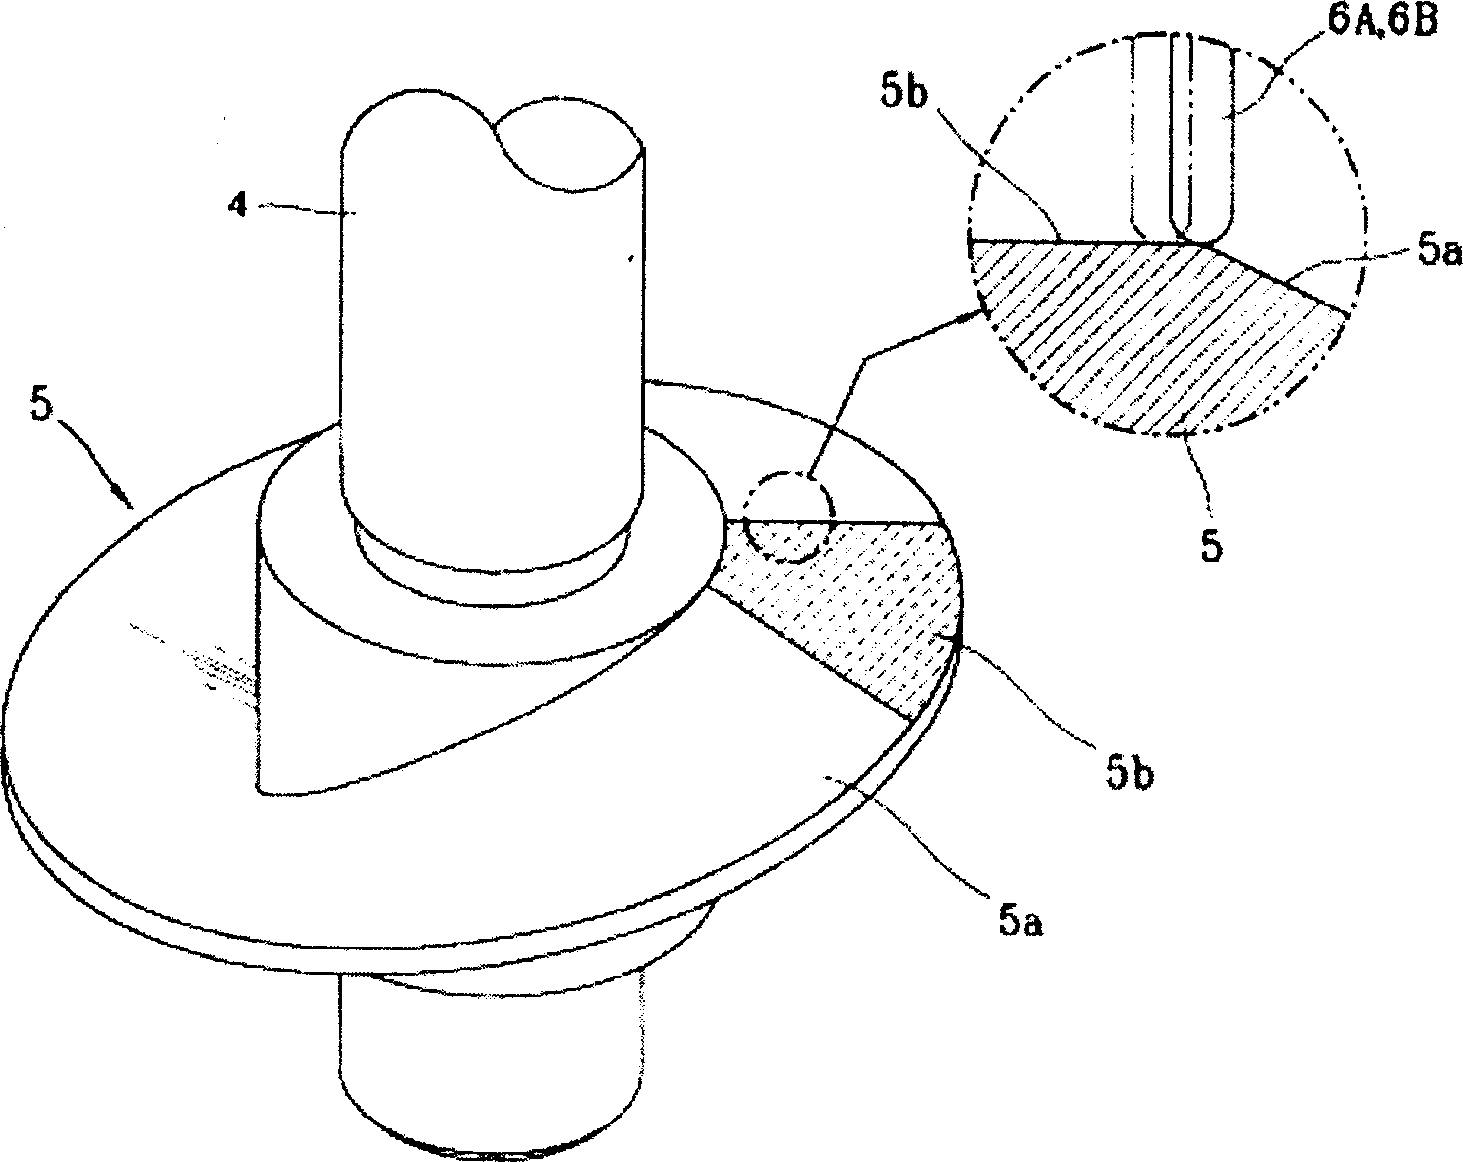 Partition plate structure of hermetic compressor